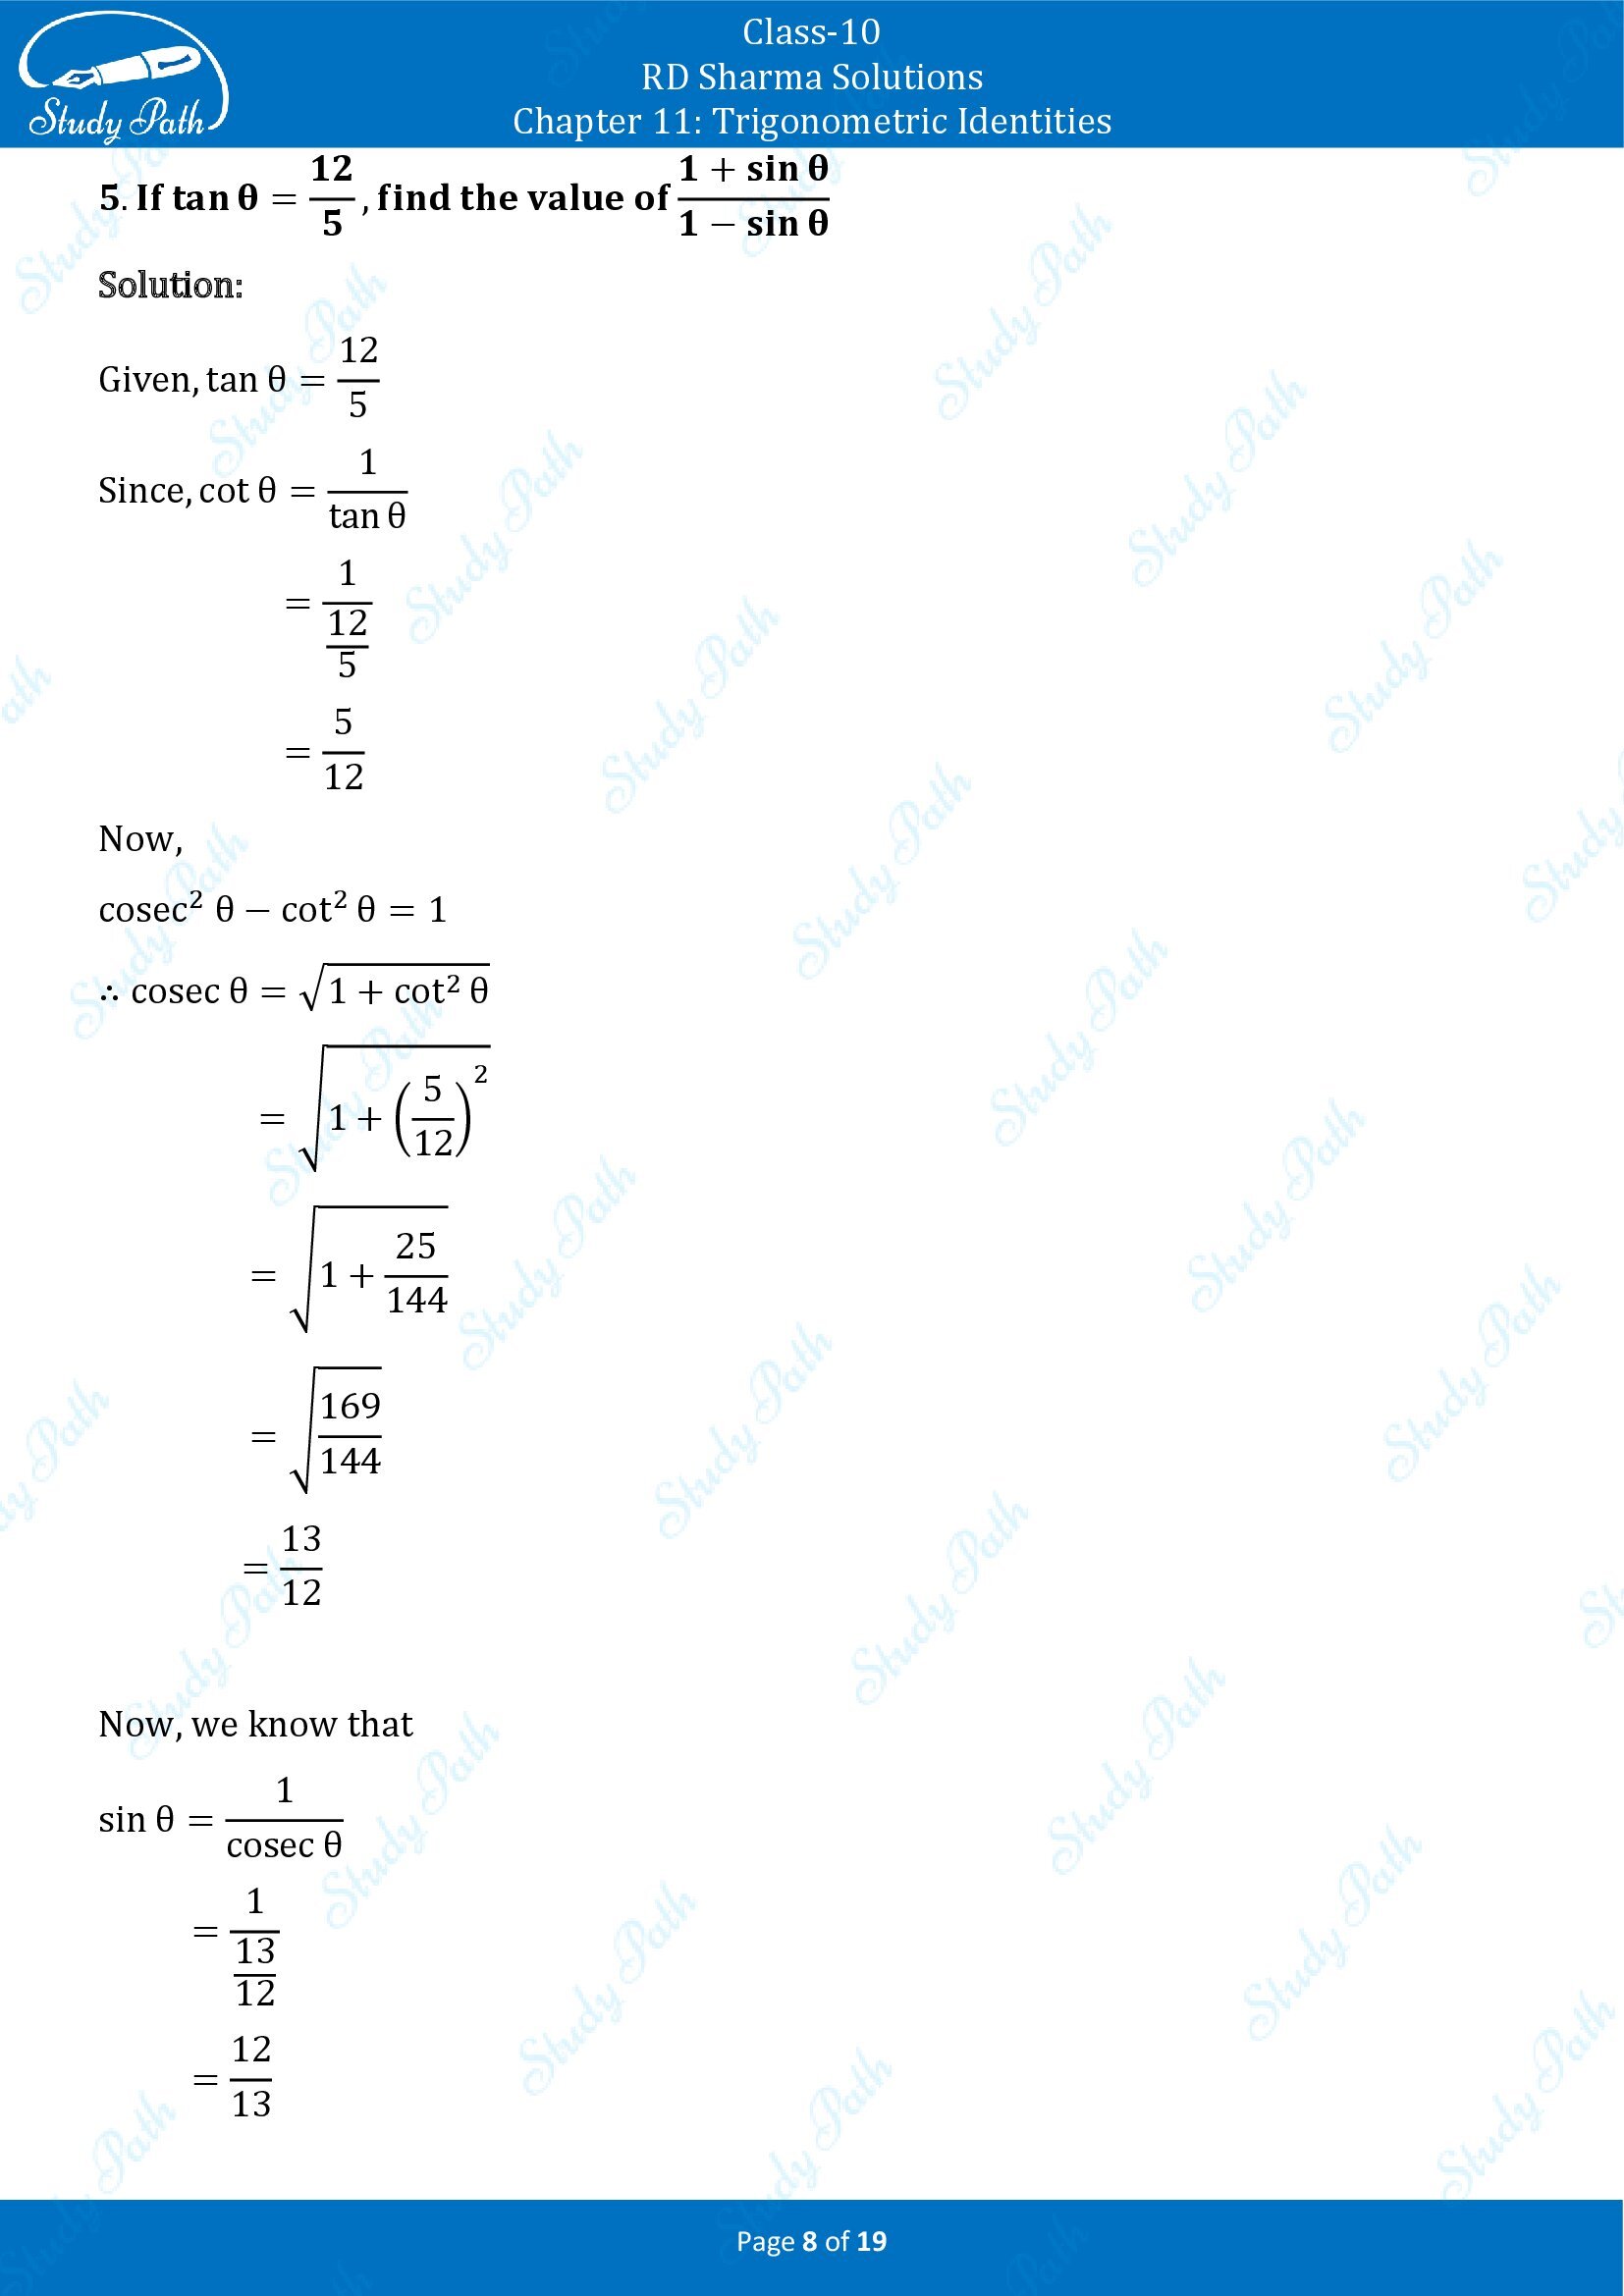 RD Sharma Solutions Class 10 Chapter 11 Trigonometric Identities Exercise 11.2 00008